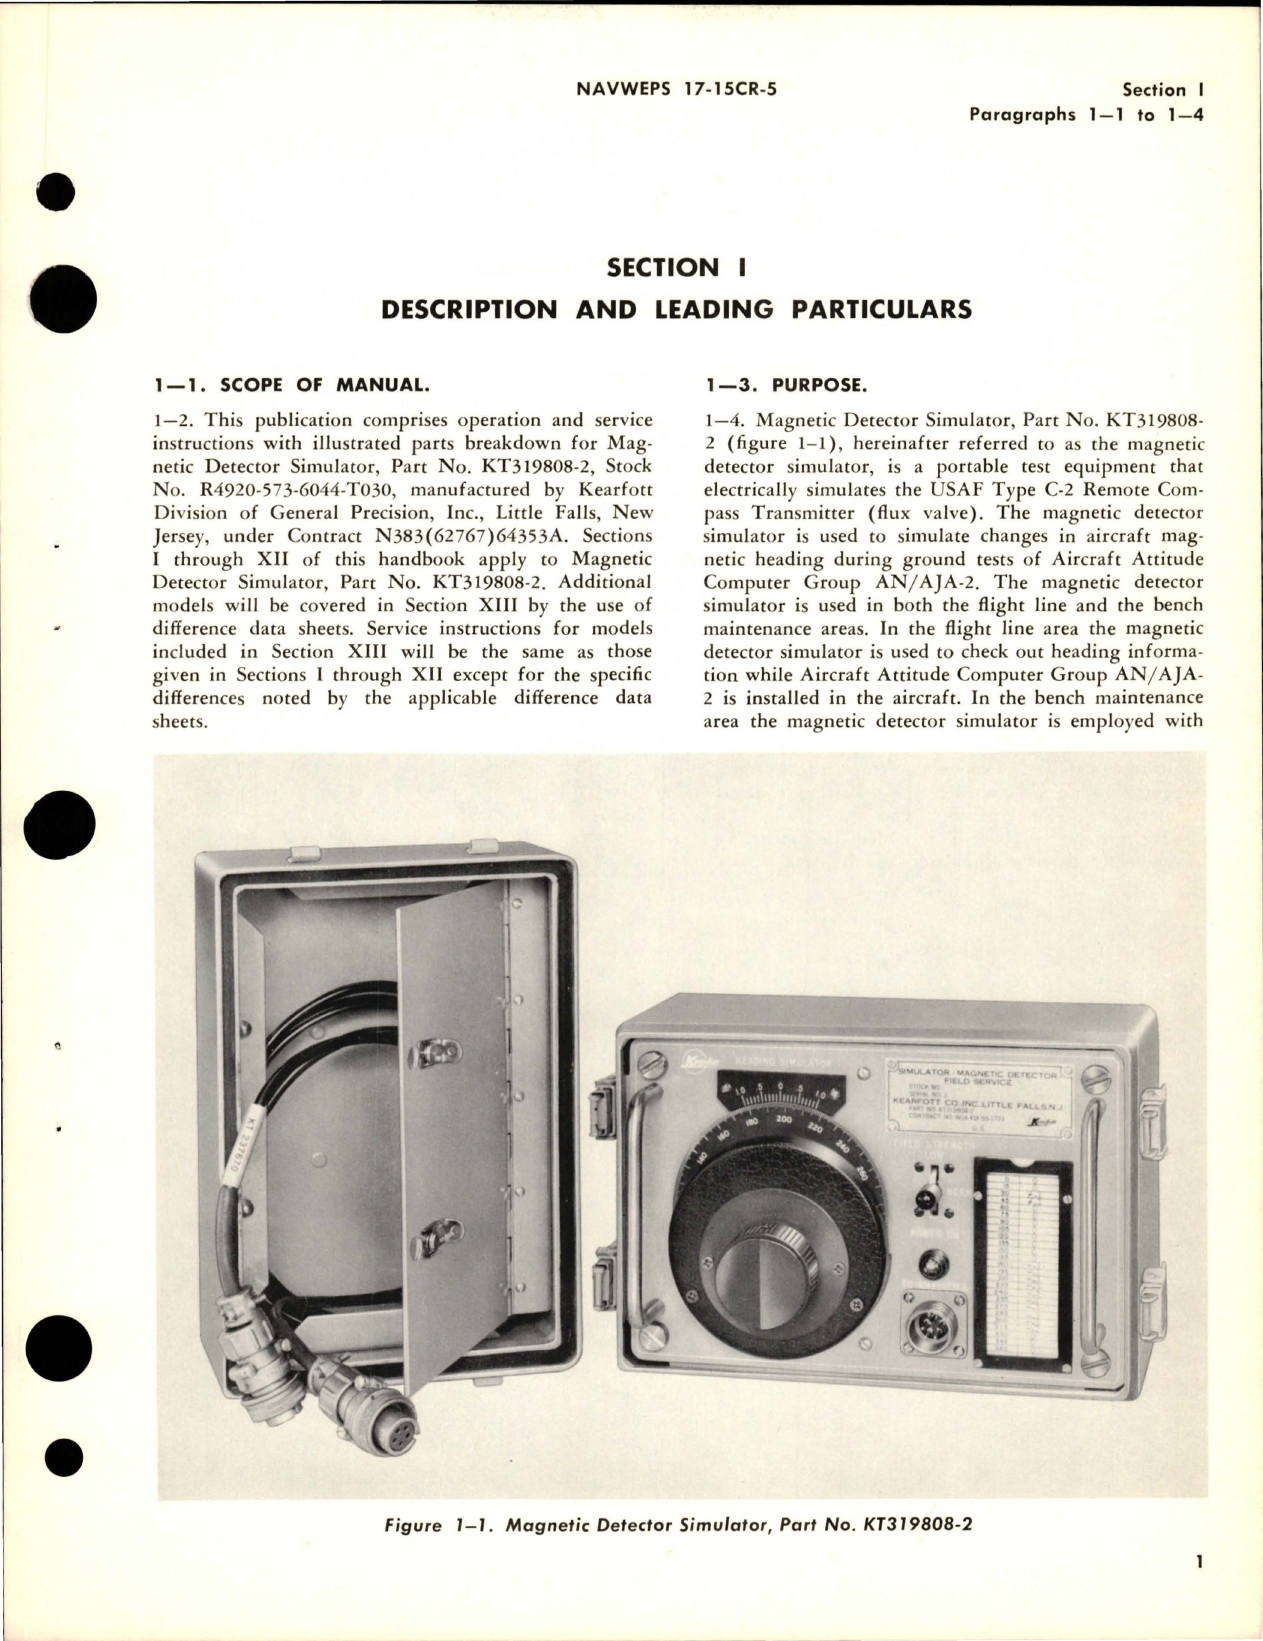 Sample page 5 from AirCorps Library document: Operation and Service Instructions with Illustrated Parts Breakdown for Magnetic Detector Simulator - Part KT319809-2